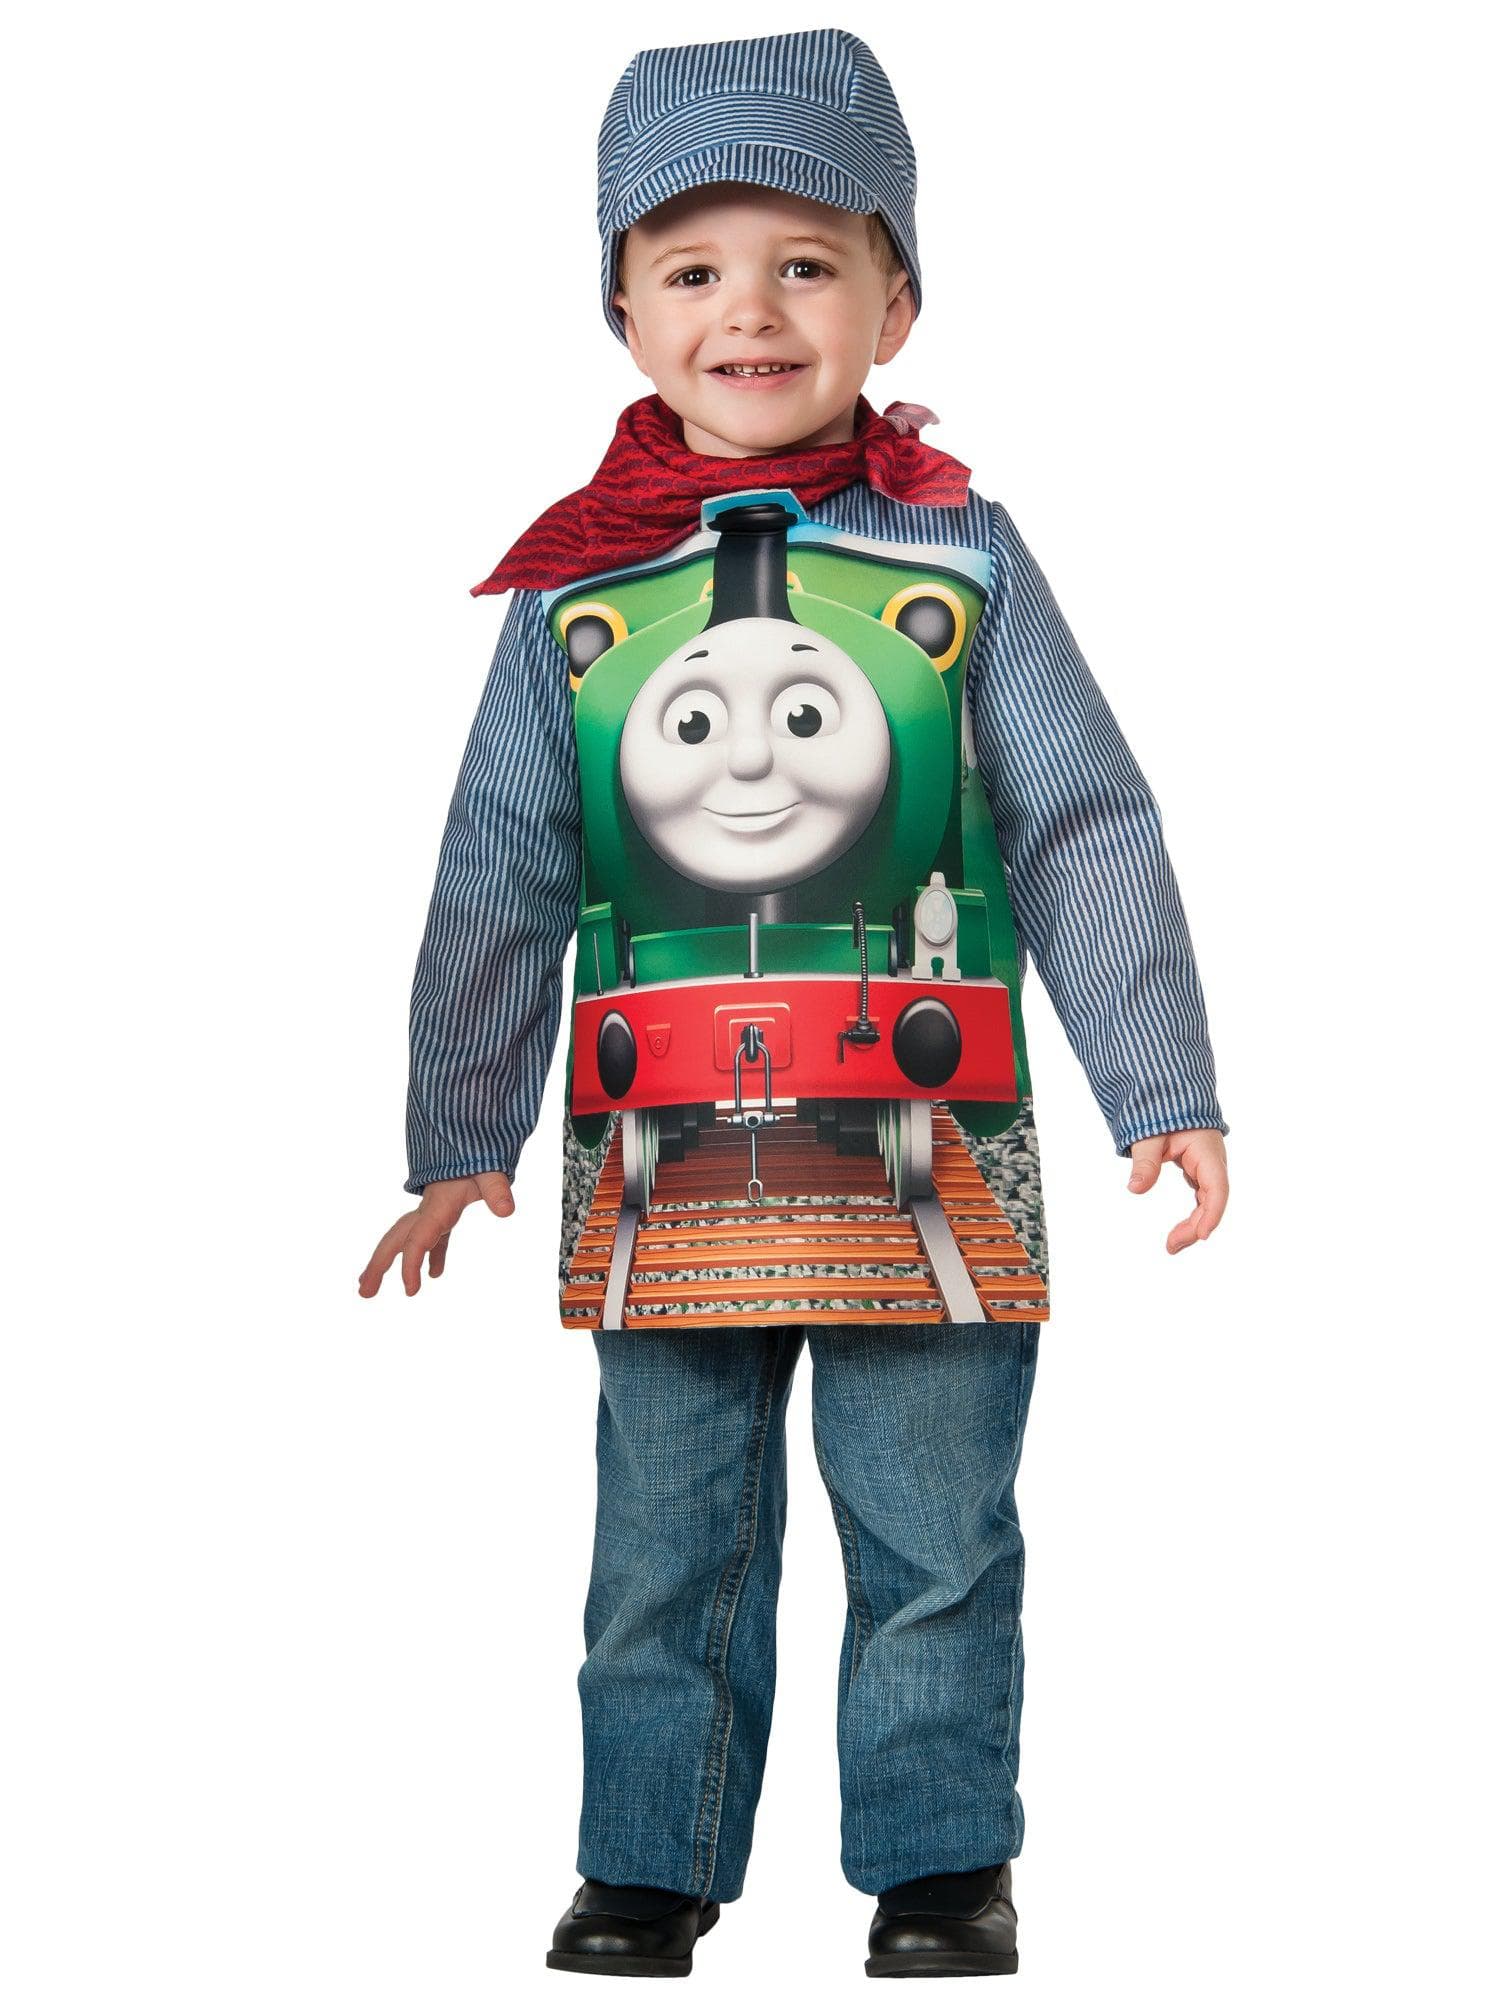 Thomas The Tank Engineer Percy Costume for Toddlers - Deluxe - costumes.com